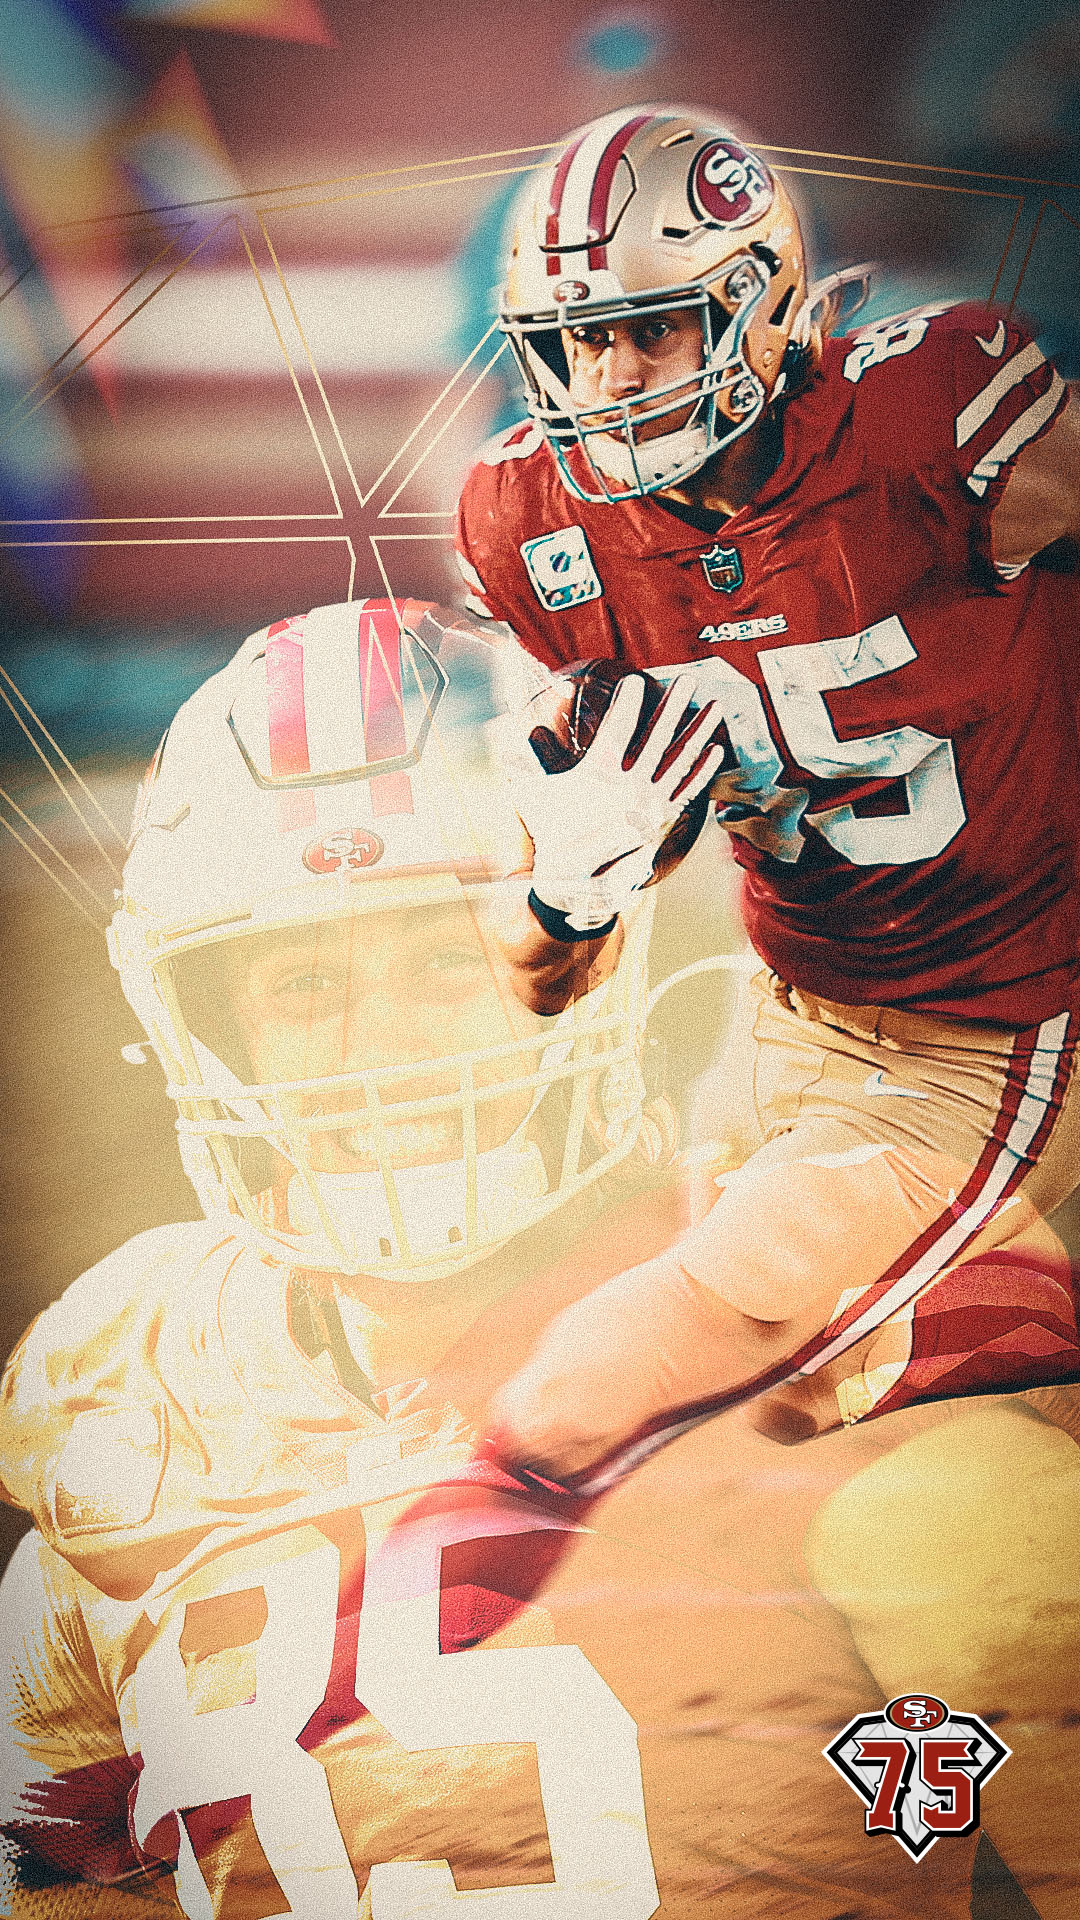 San Francisco 49ers bling for your screen. #FTTB. #WallpaperWednesday